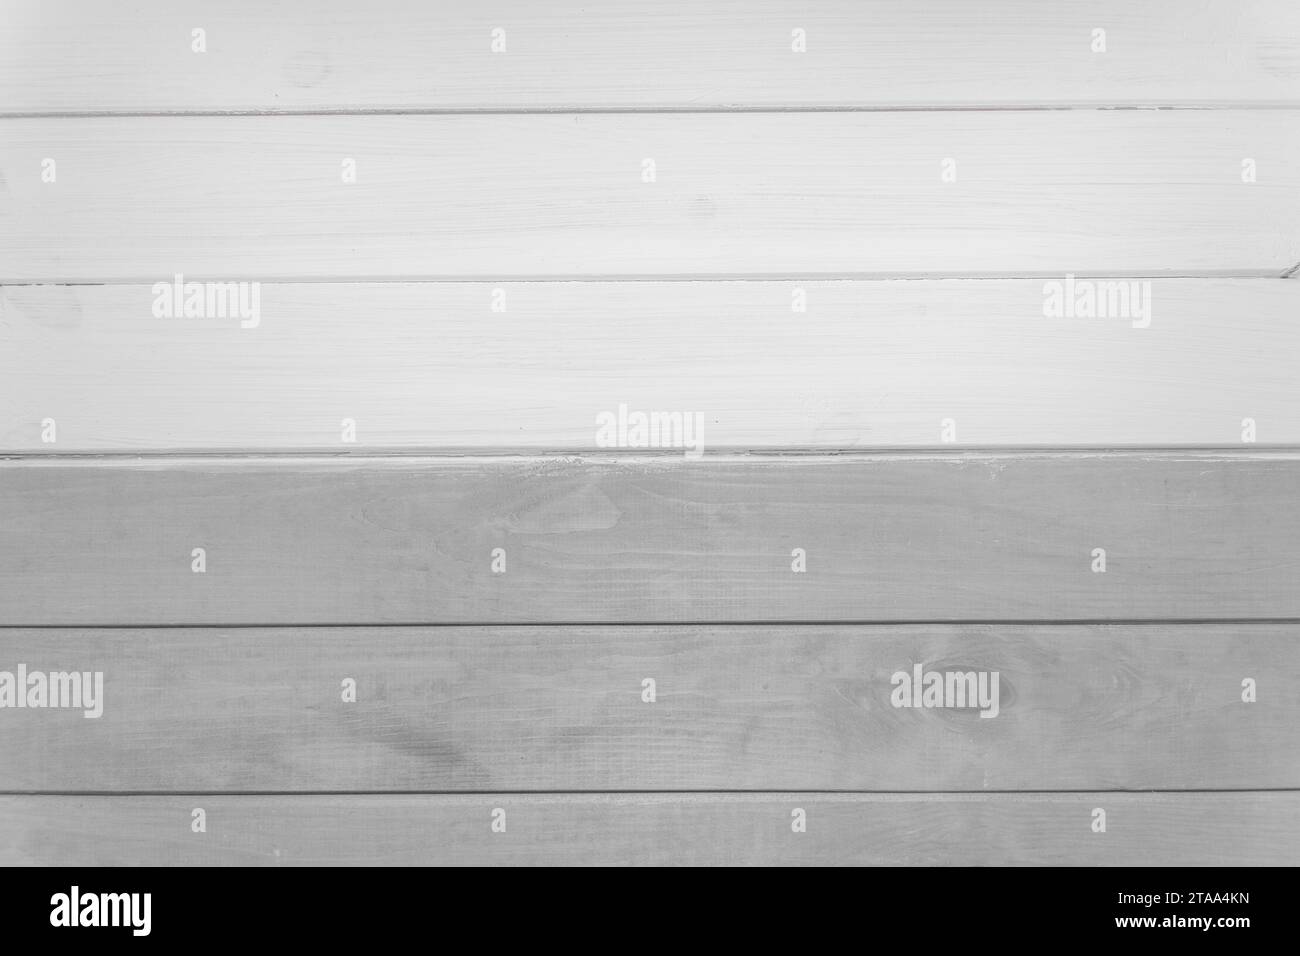 Wooden Horizontal Lines Stripes Planks Surface Two 2 Colors Grey White Paint Texture Background. Stock Photo